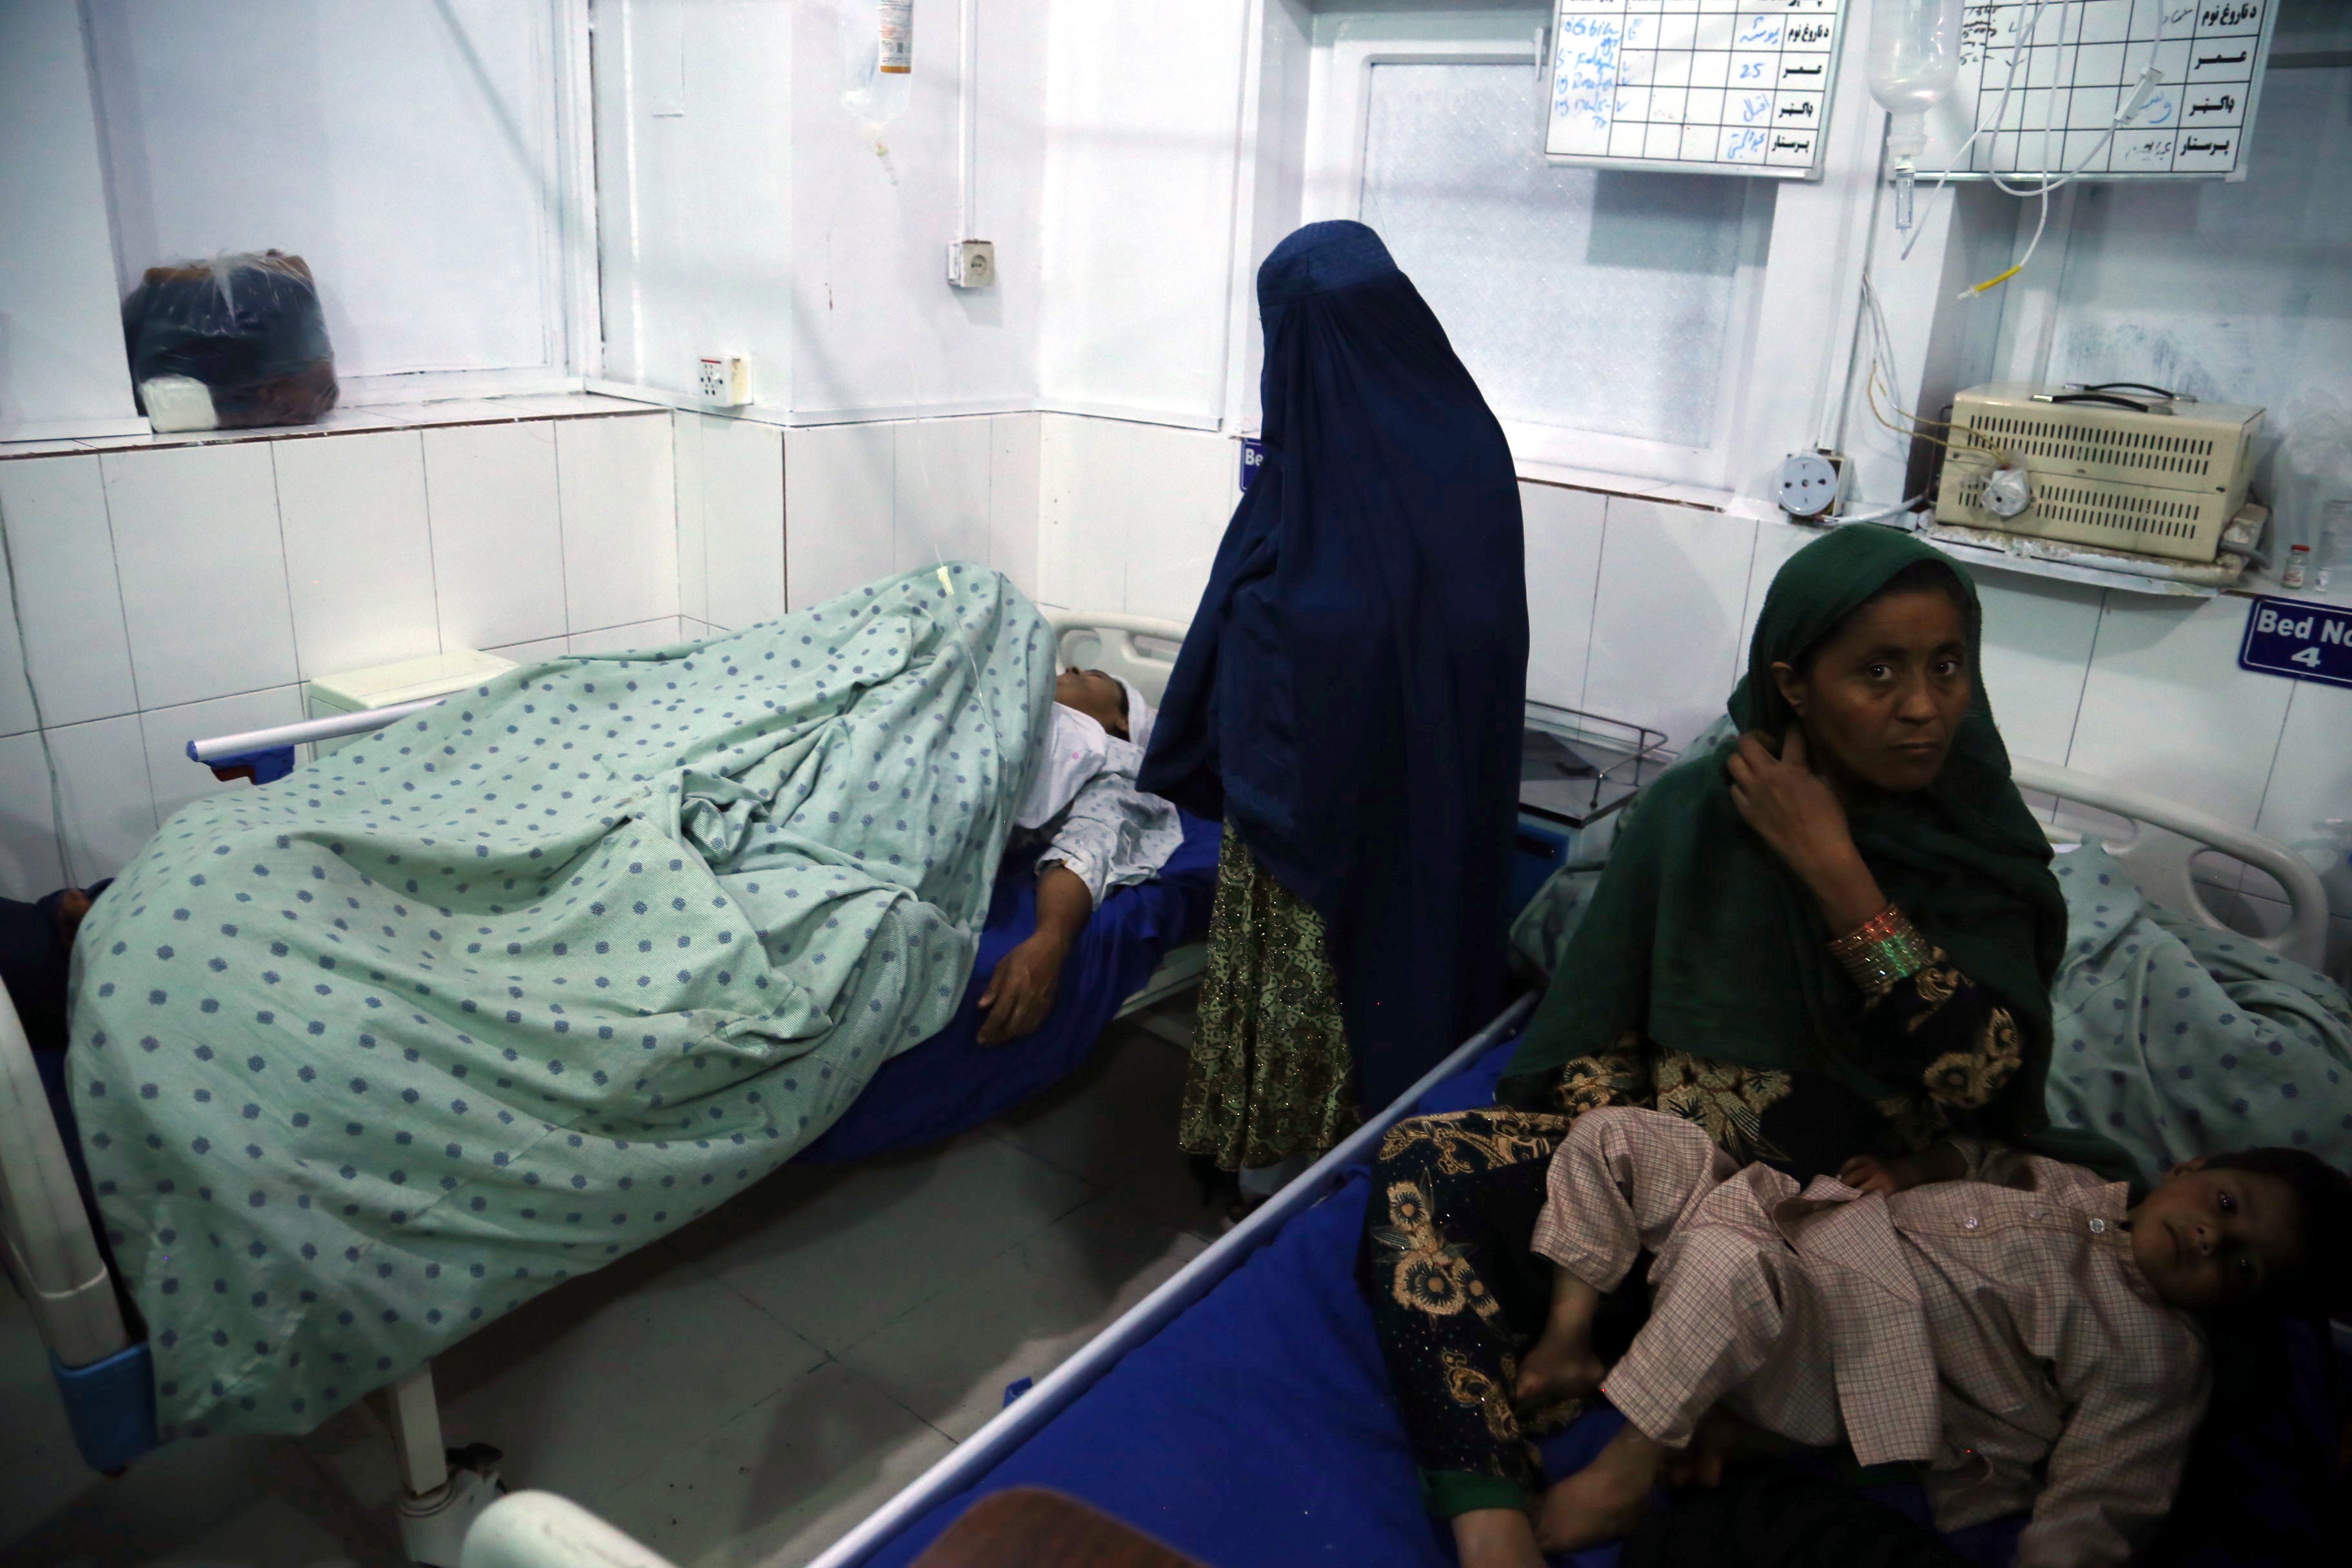 An Afghan woman who was injured when unknown gunmen opened fire and killed Afghan female journalists of Enikas Radio Television Network, receives medical treatment at a hospital, in Jalalabad, Afghanistan